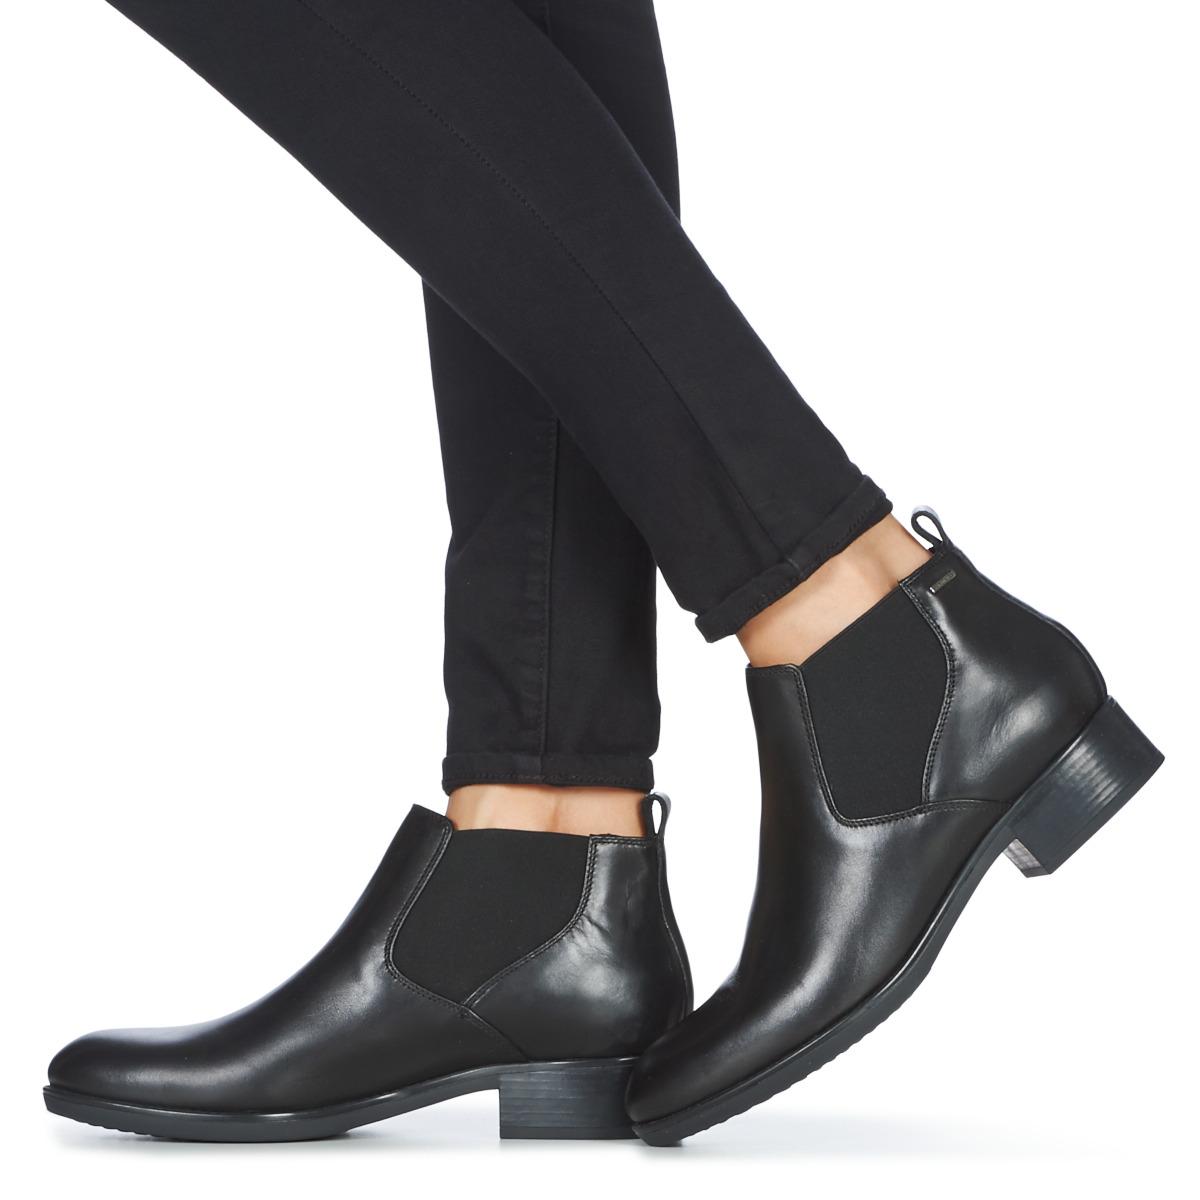 Geox D Felicity Np Abx C Mid Boots in Black | Lyst UK